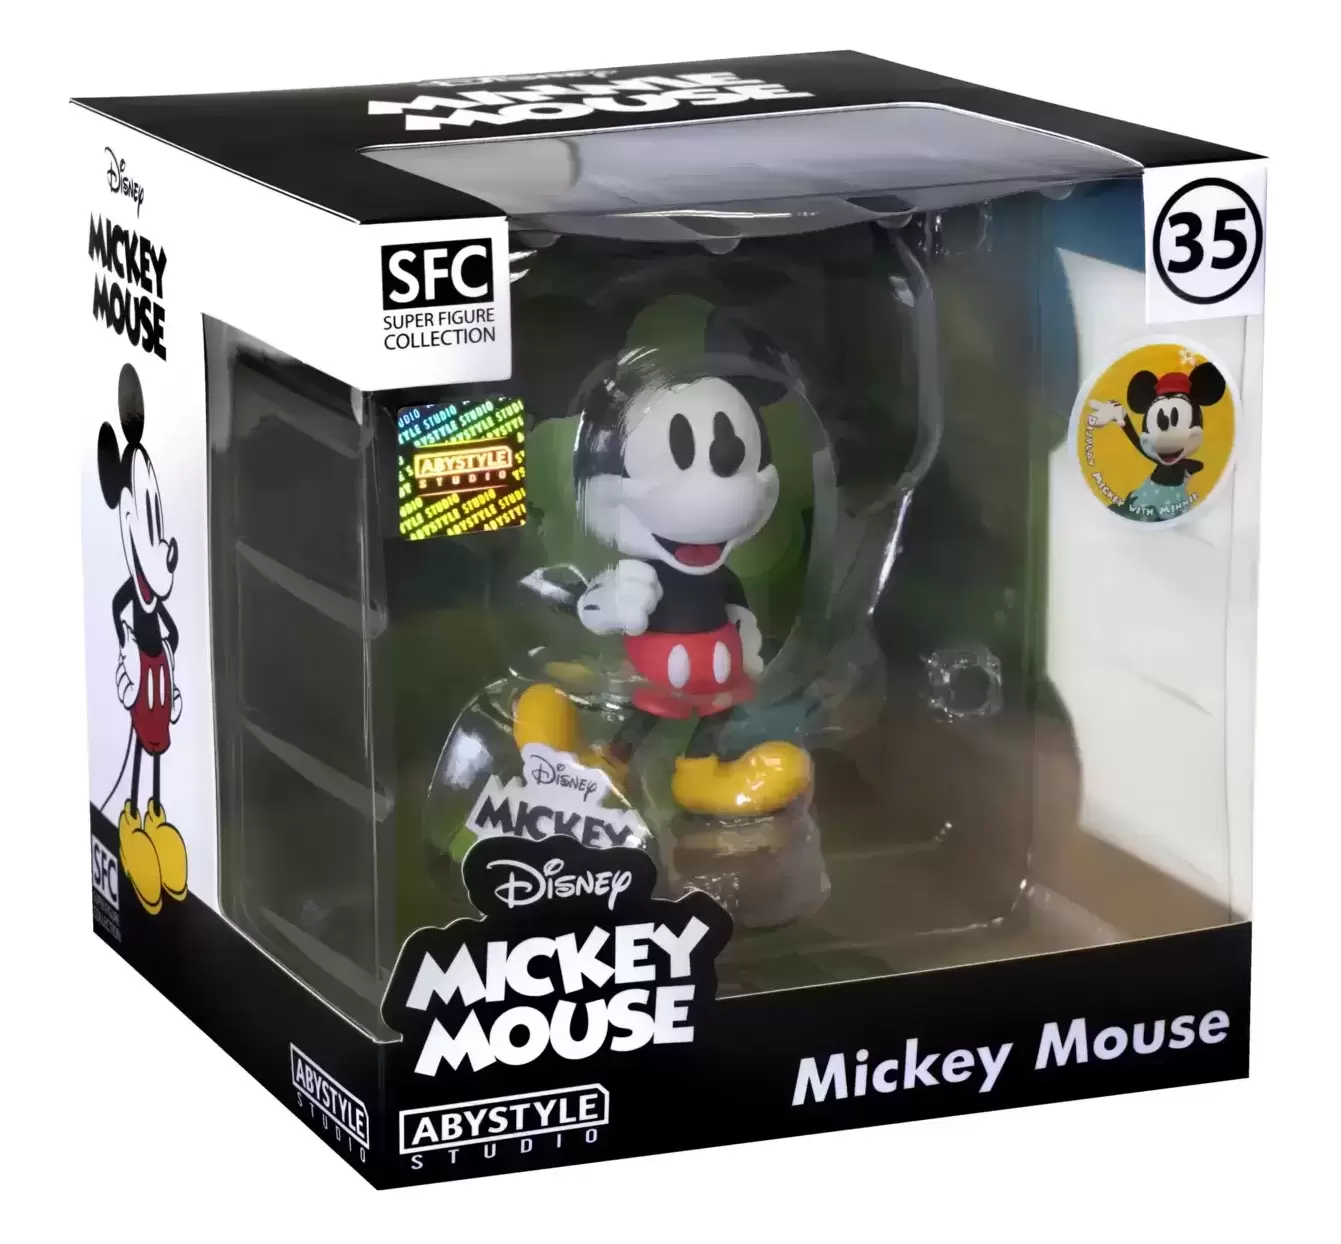 SFC - Super Figure Collection by AbyStyle Studio - Disney - Mickey Mouse